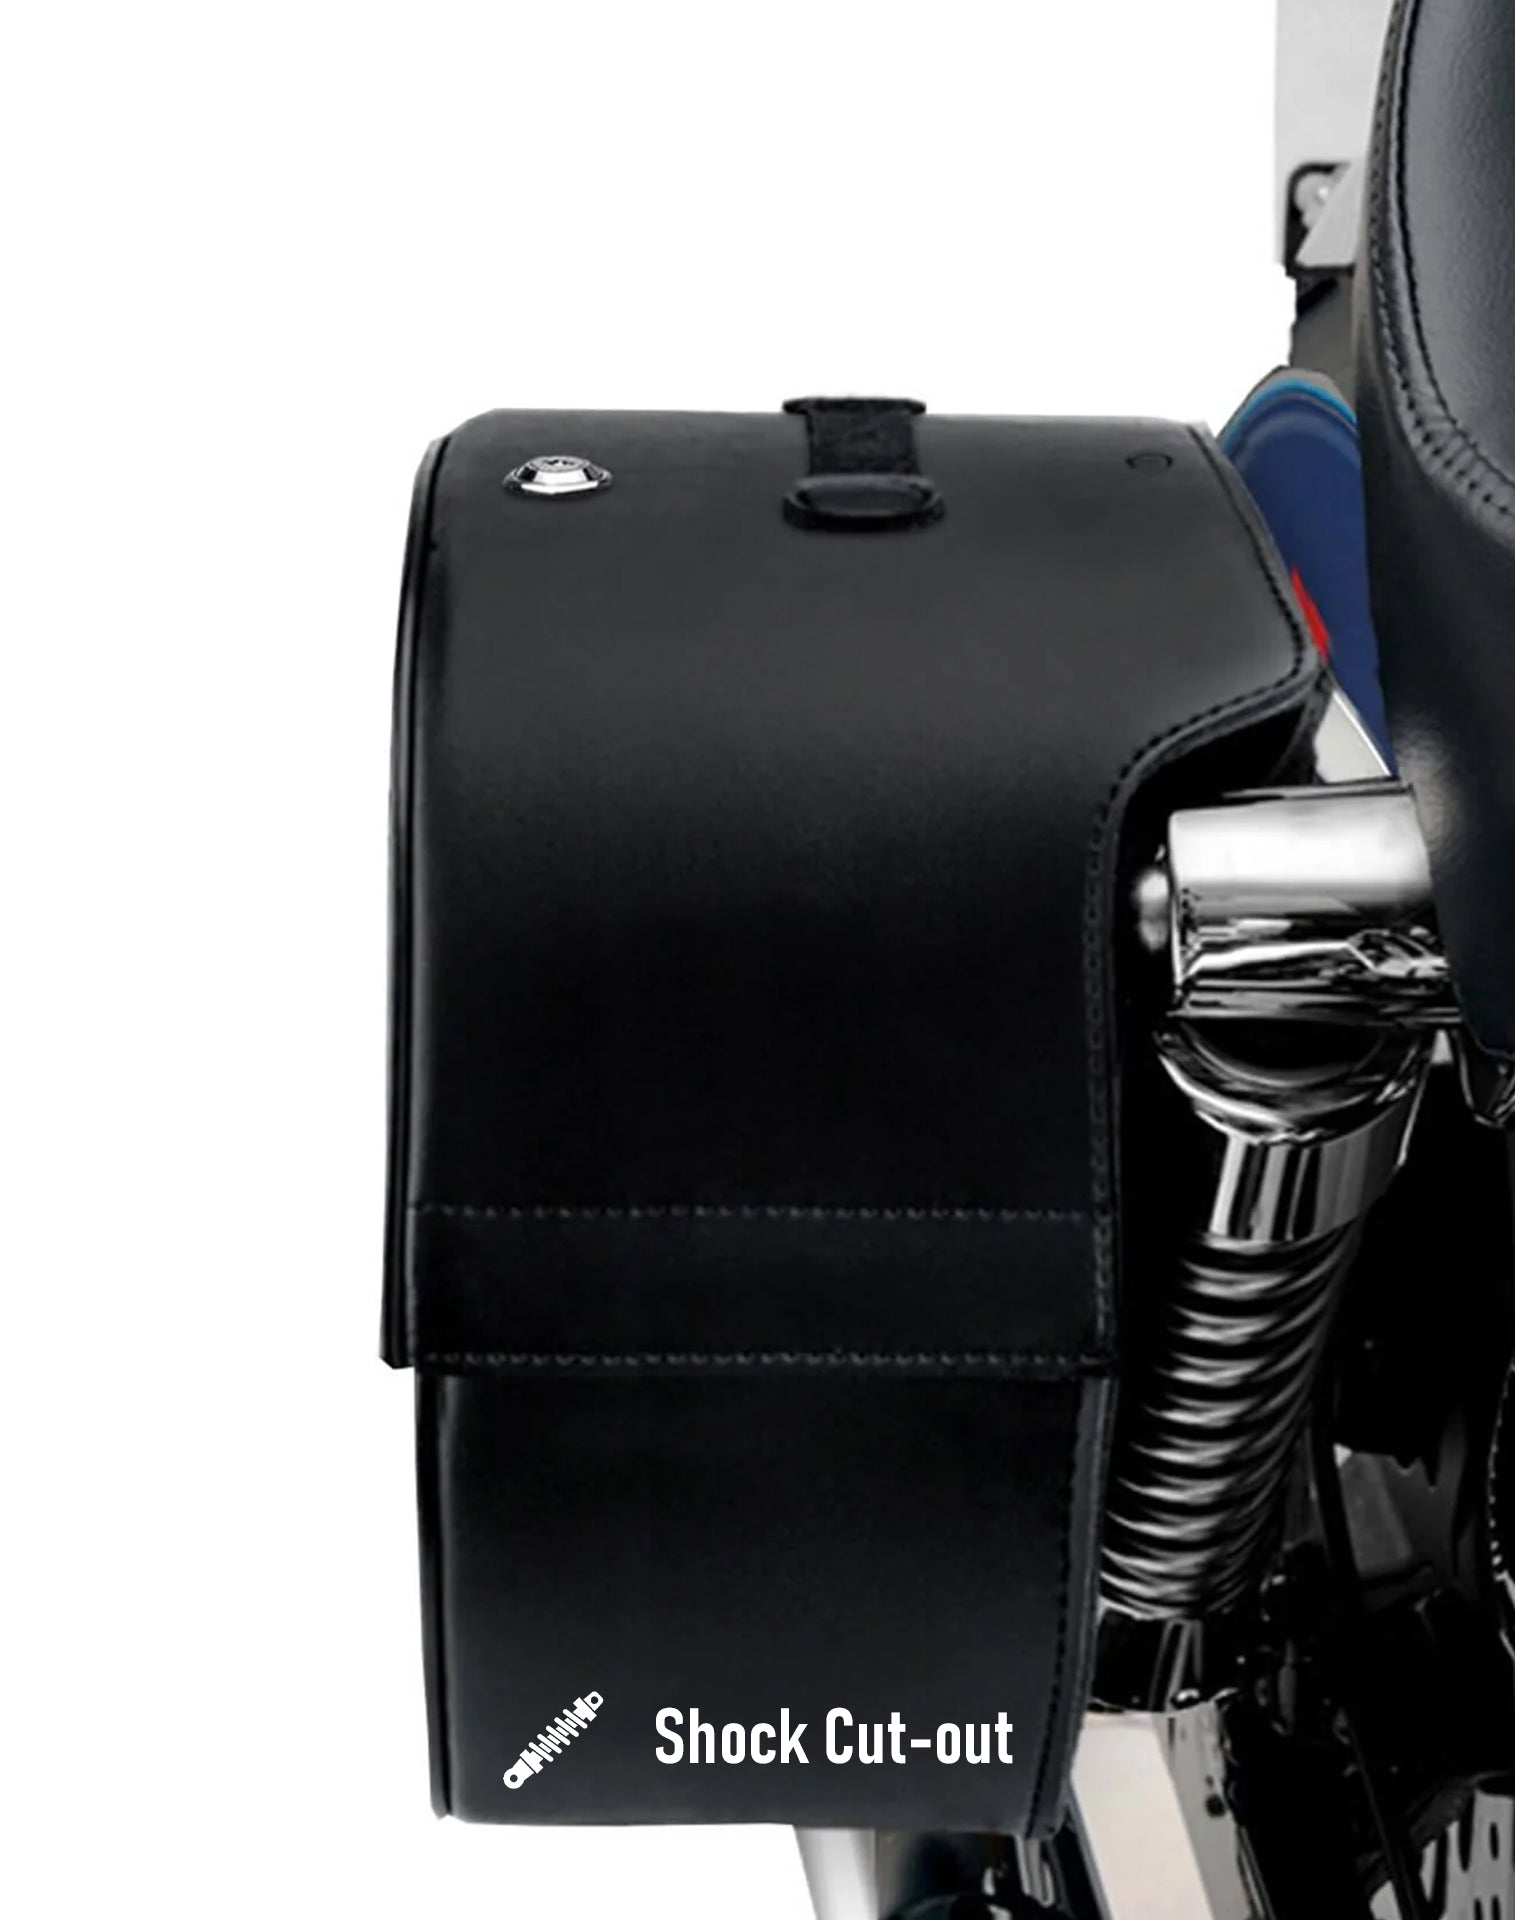 Viking Club Large Triumph Thunderbird Shock Cut Out Leather Motorcycle Saddlebags are Durable